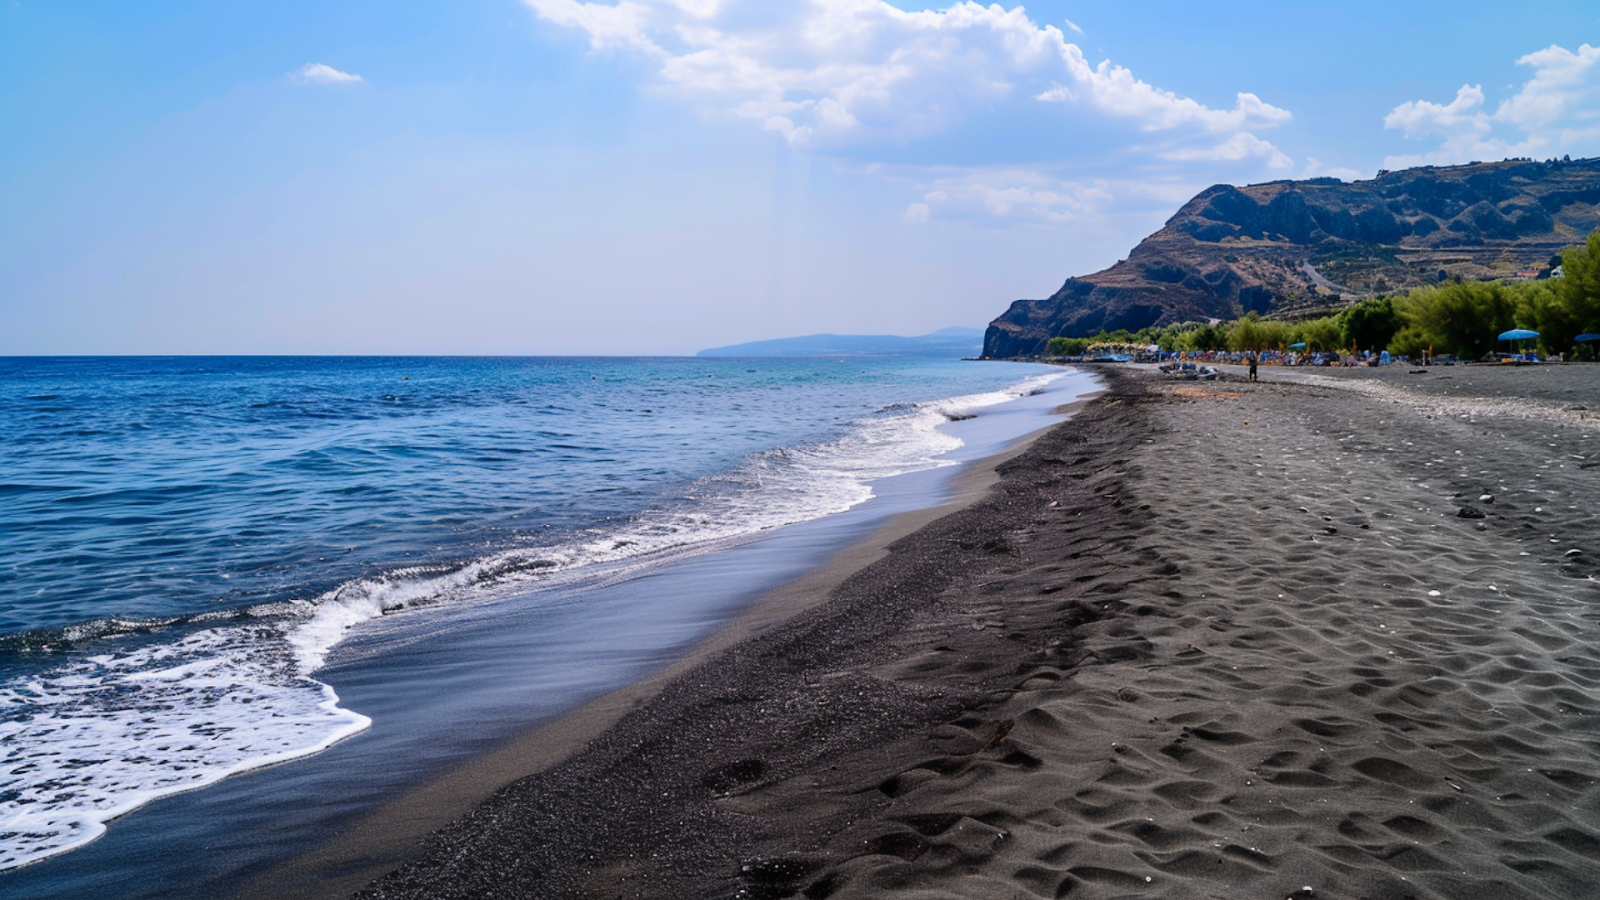 Blue waters crushing against the gray, volcanic sands of a beach in Santorini